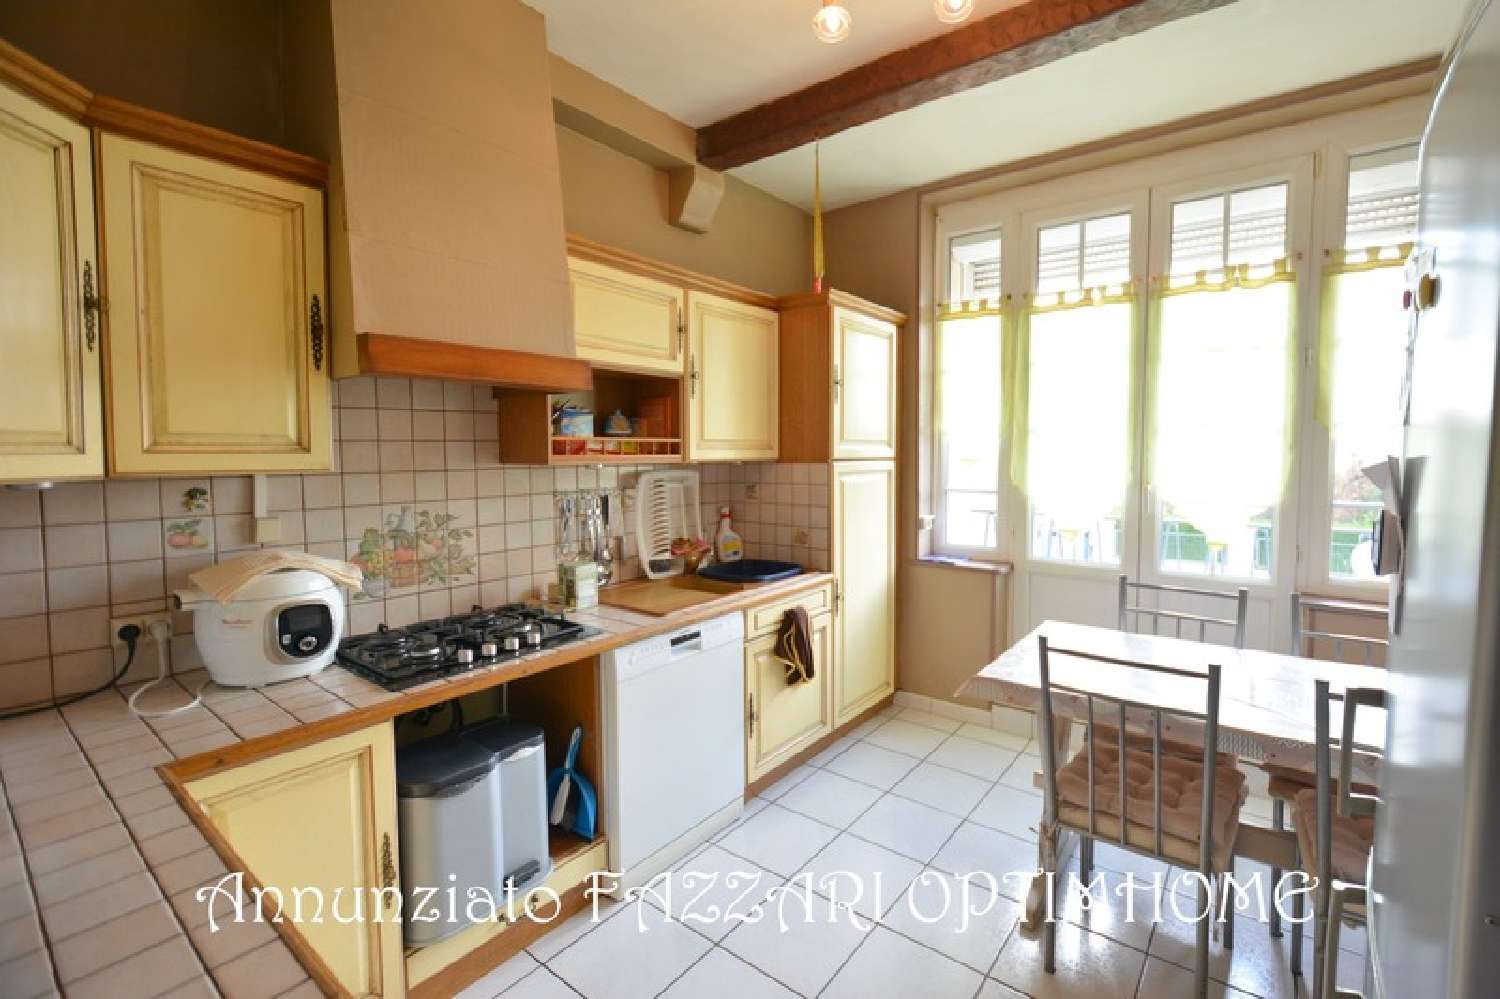  for sale village house Inor Meuse 8